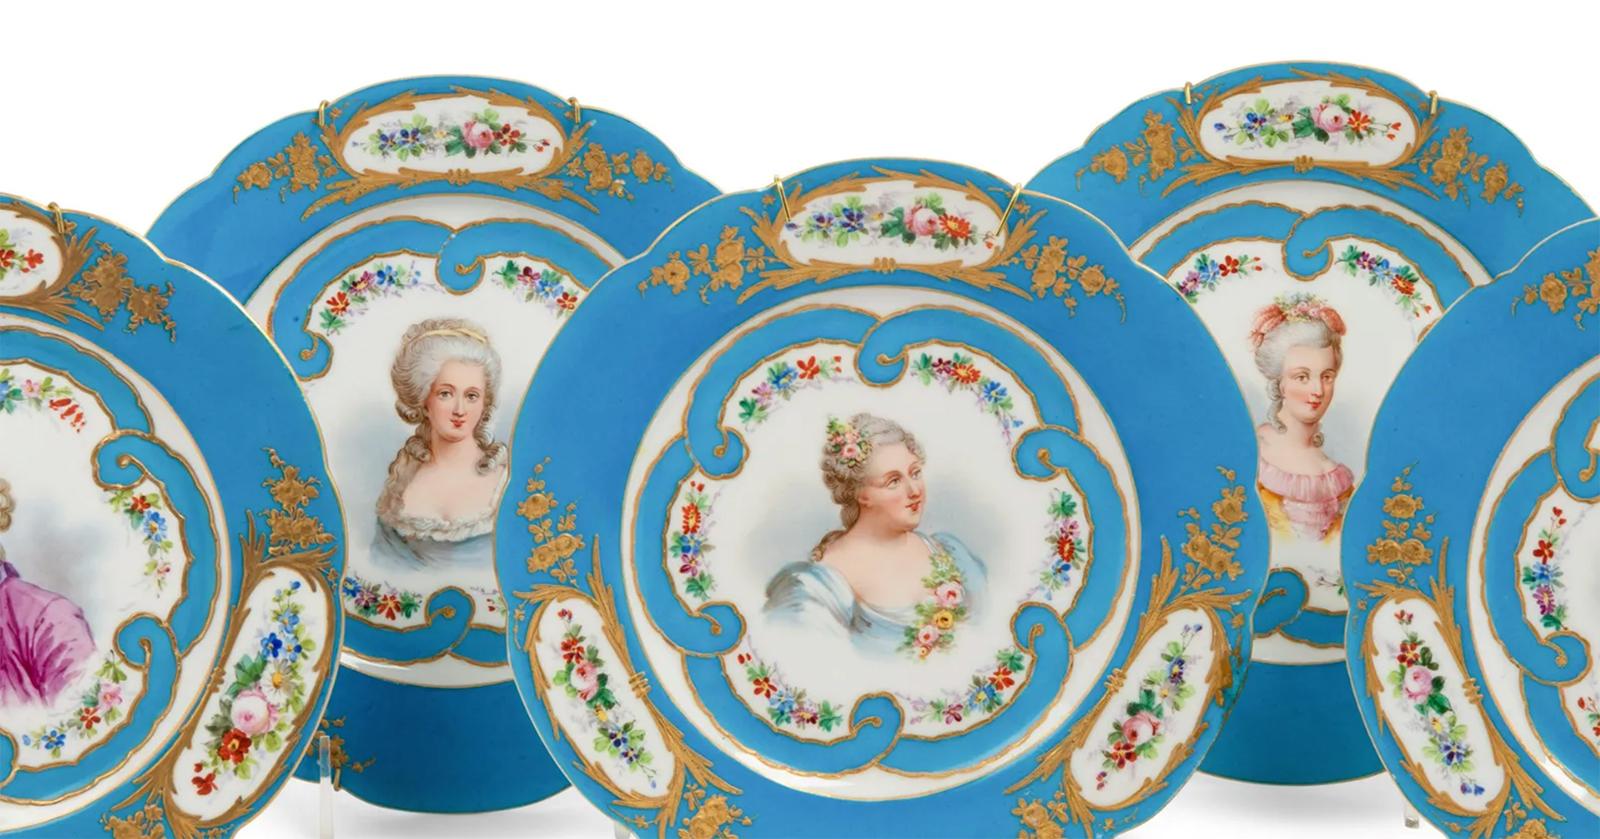 A set of 12 sèvres porcelain plates from the late 19th century. Includes eight plates and four footed cake plates, each with Louis Philippe monogram and identification on the undersides. 

Diameters vary from 9.25 to 9.5 inches.